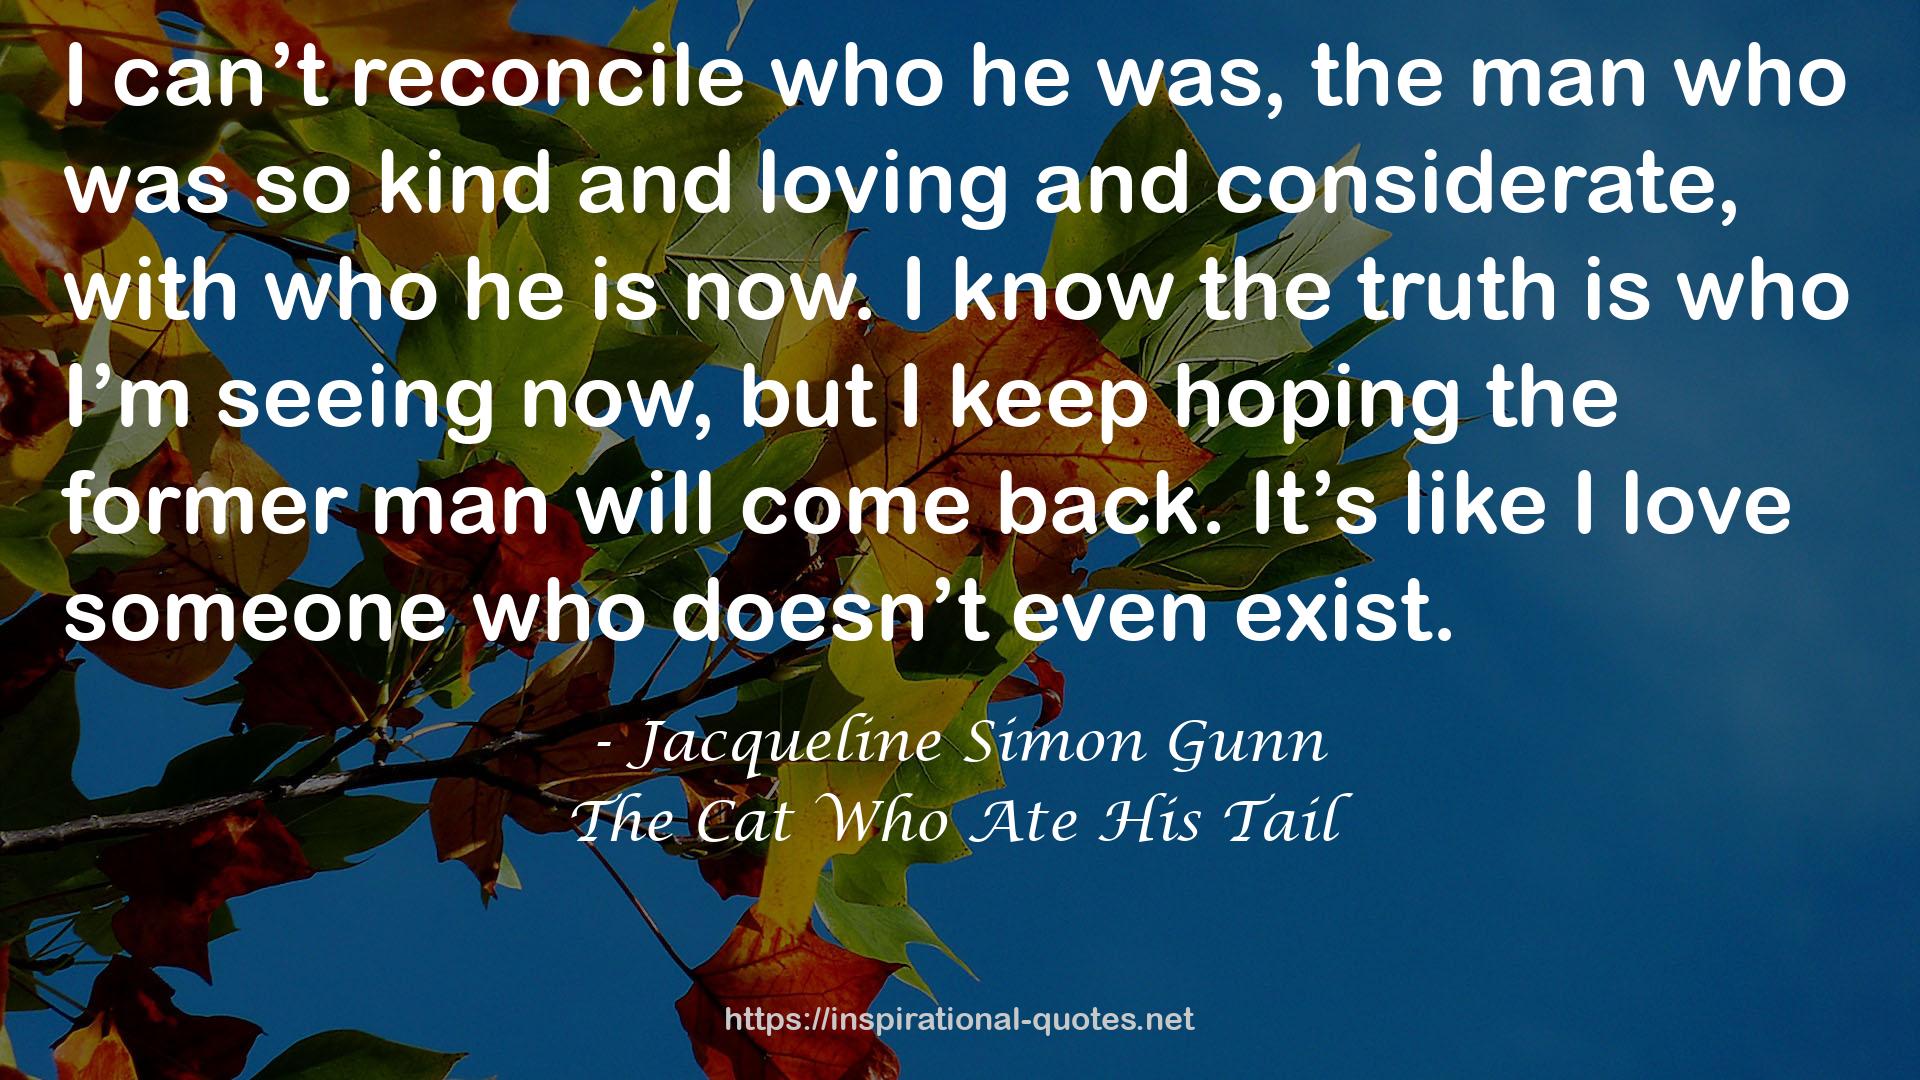 The Cat Who Ate His Tail QUOTES